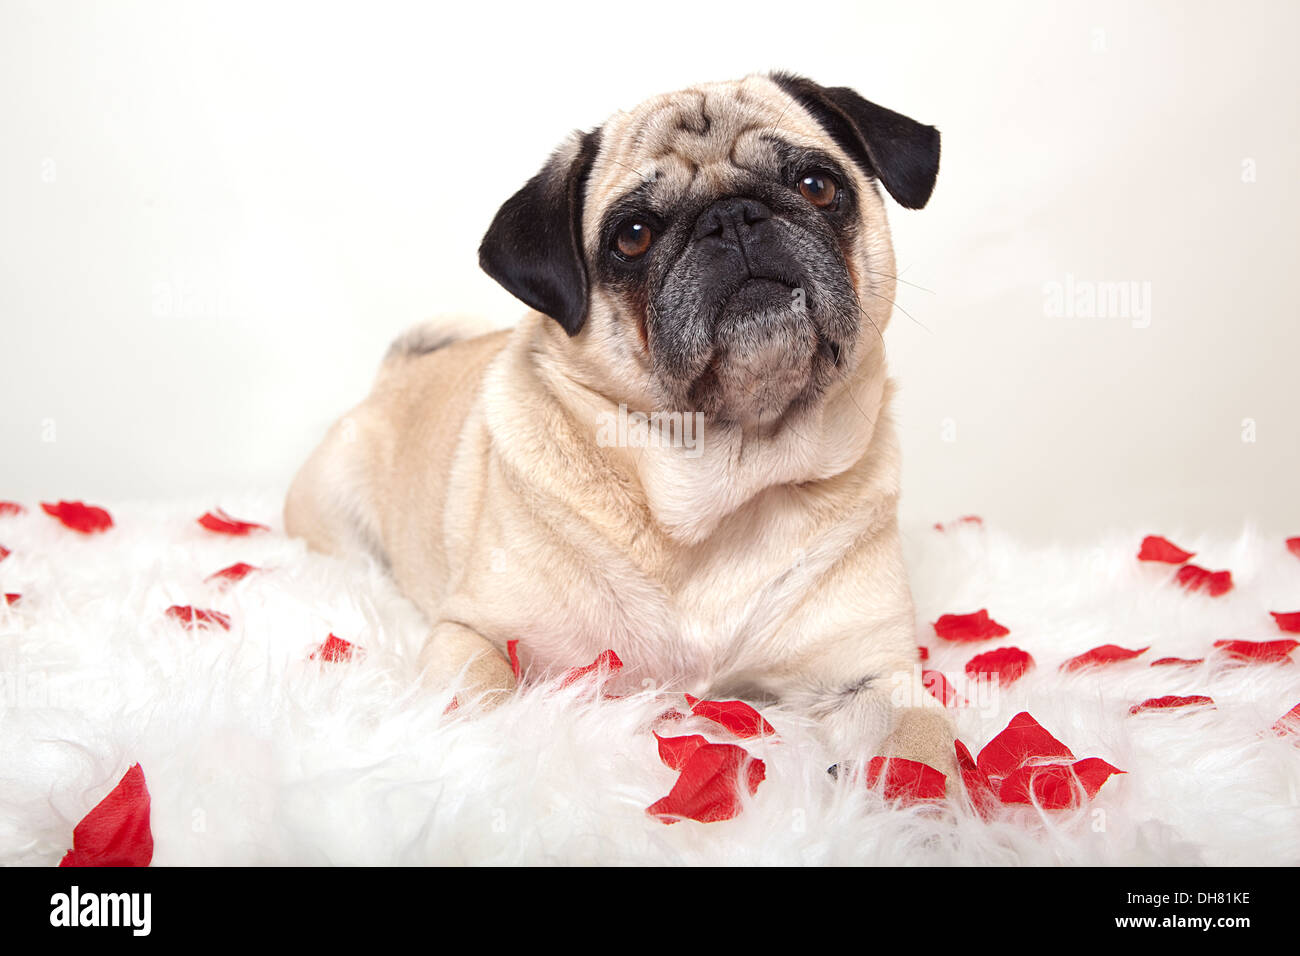 a pug dog lying on a white blanket and looking at the camera, white background Stock Photo